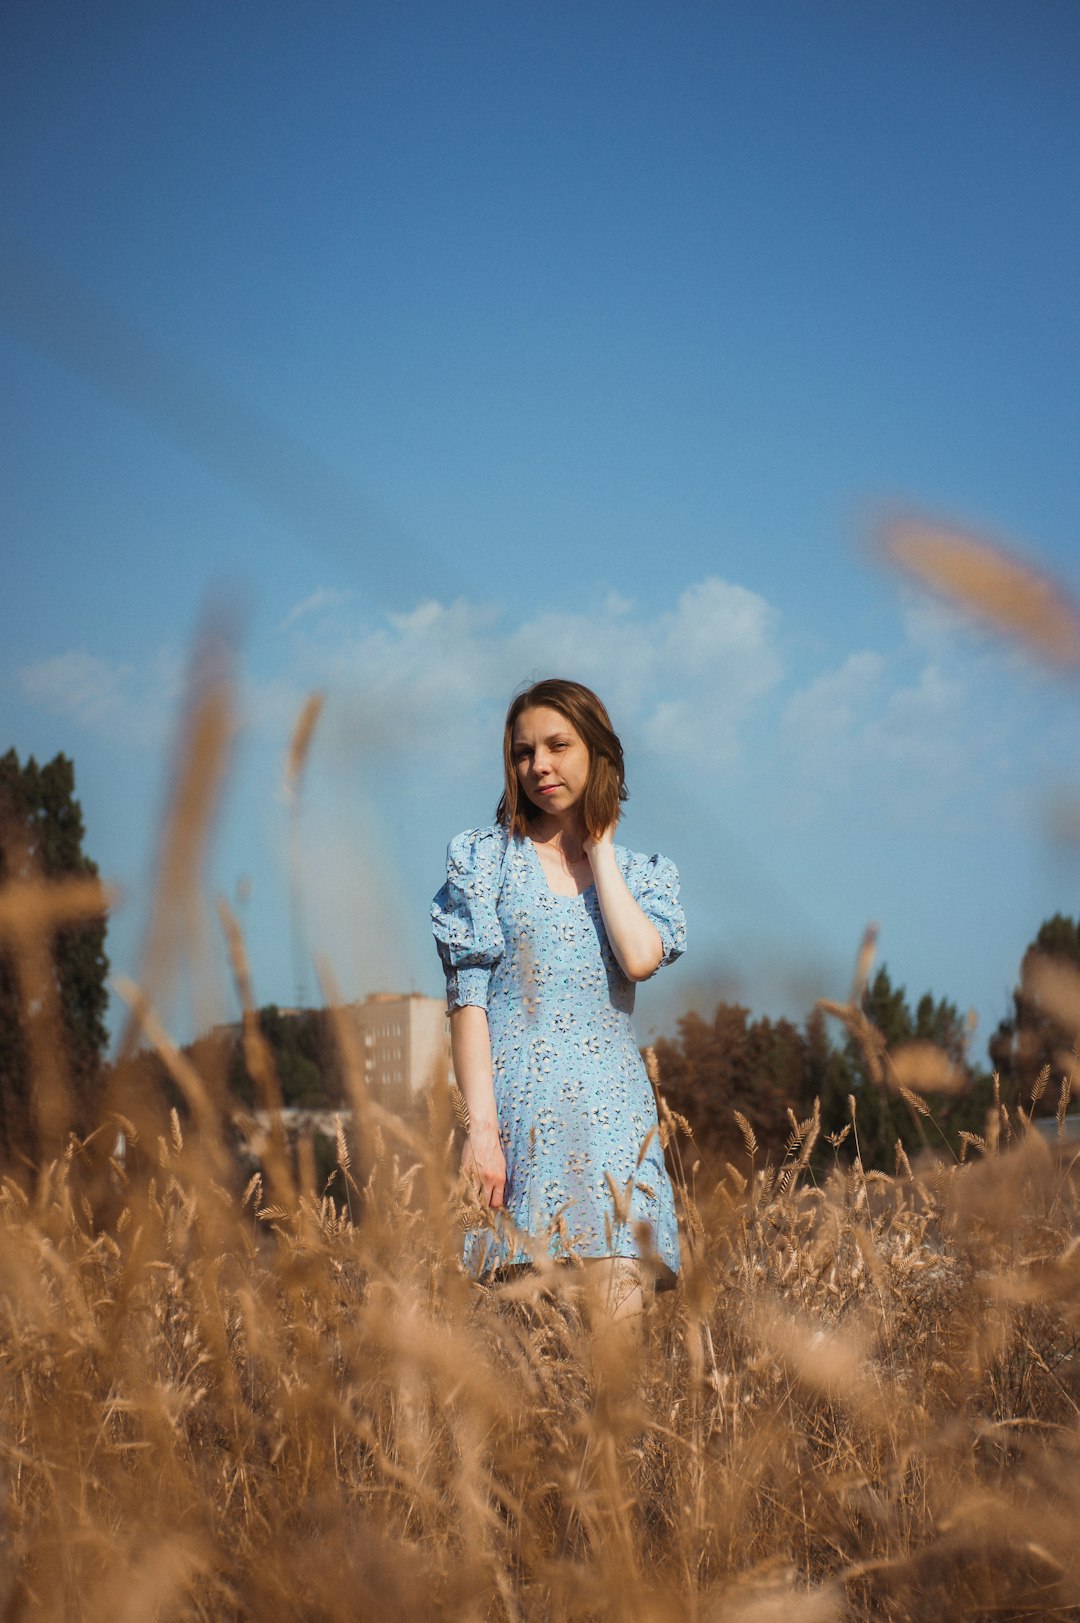 girl in white and blue floral dress standing on brown grass field during daytime